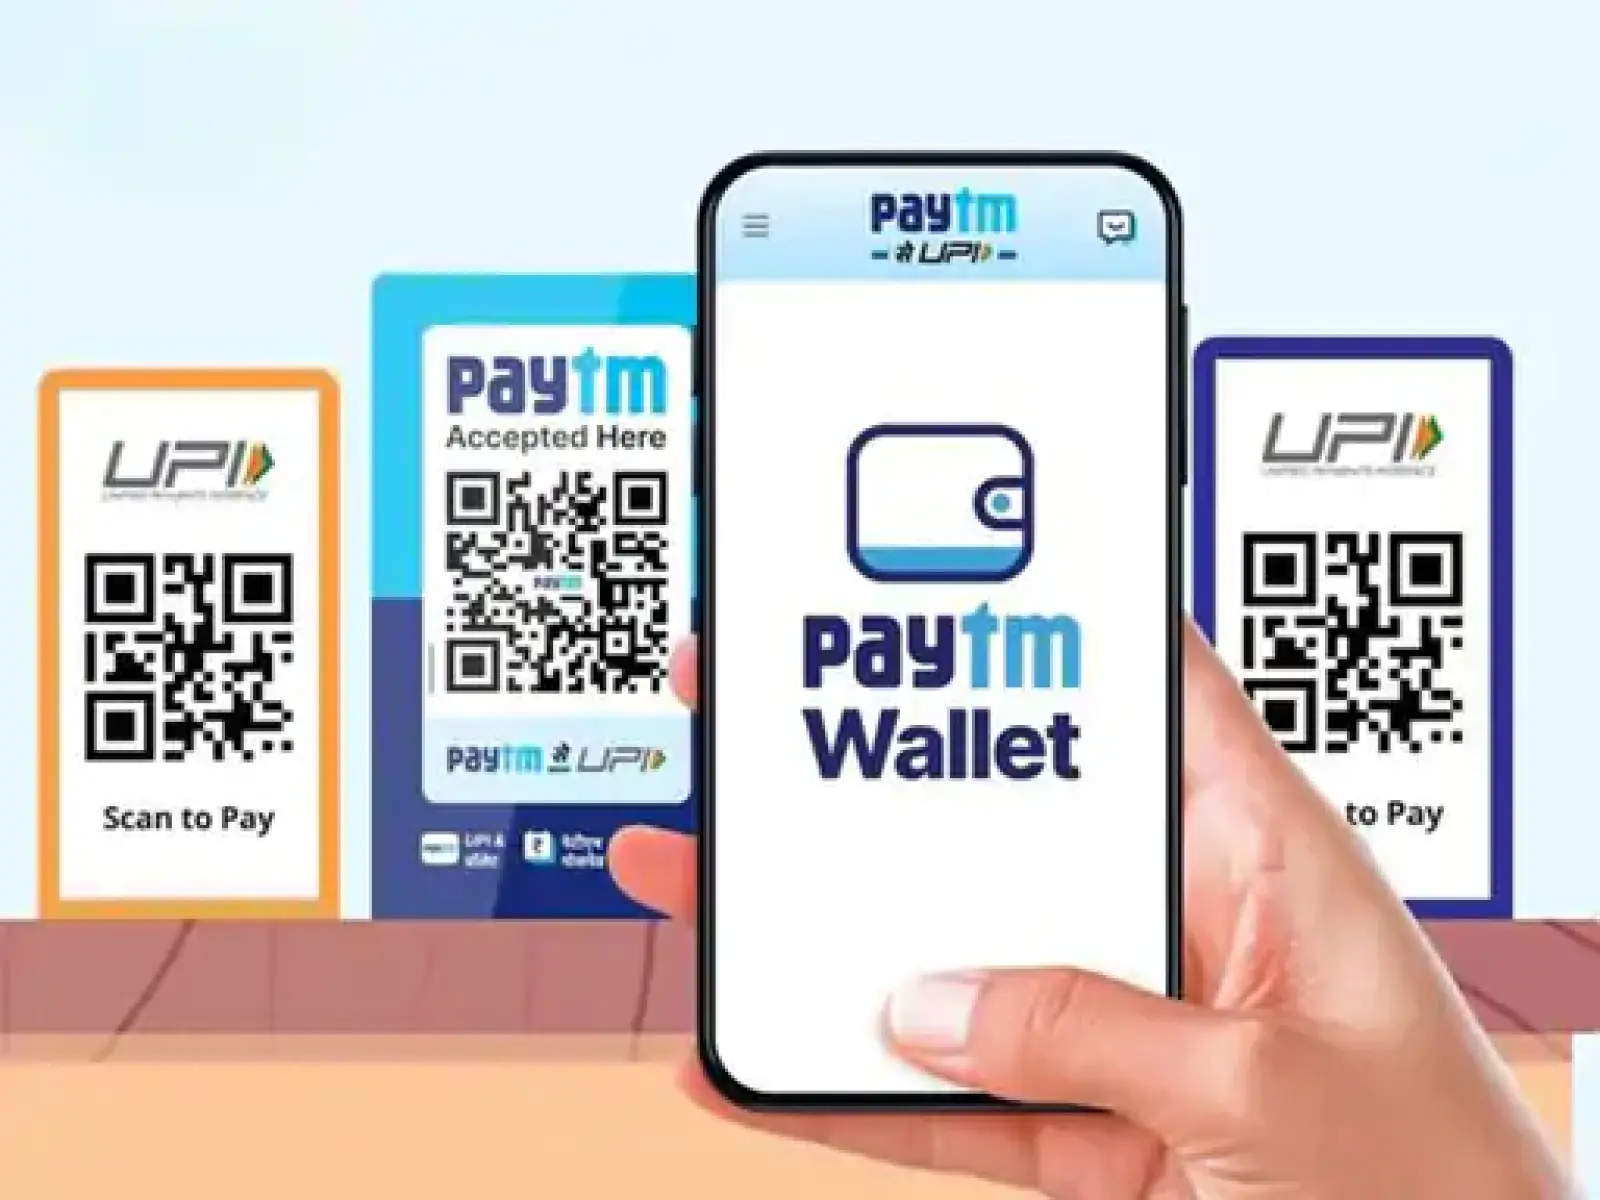 Paytm, in collaboration with SBI, Axis, HDFC, and YES Bank, will once more enable users to make UPI payments